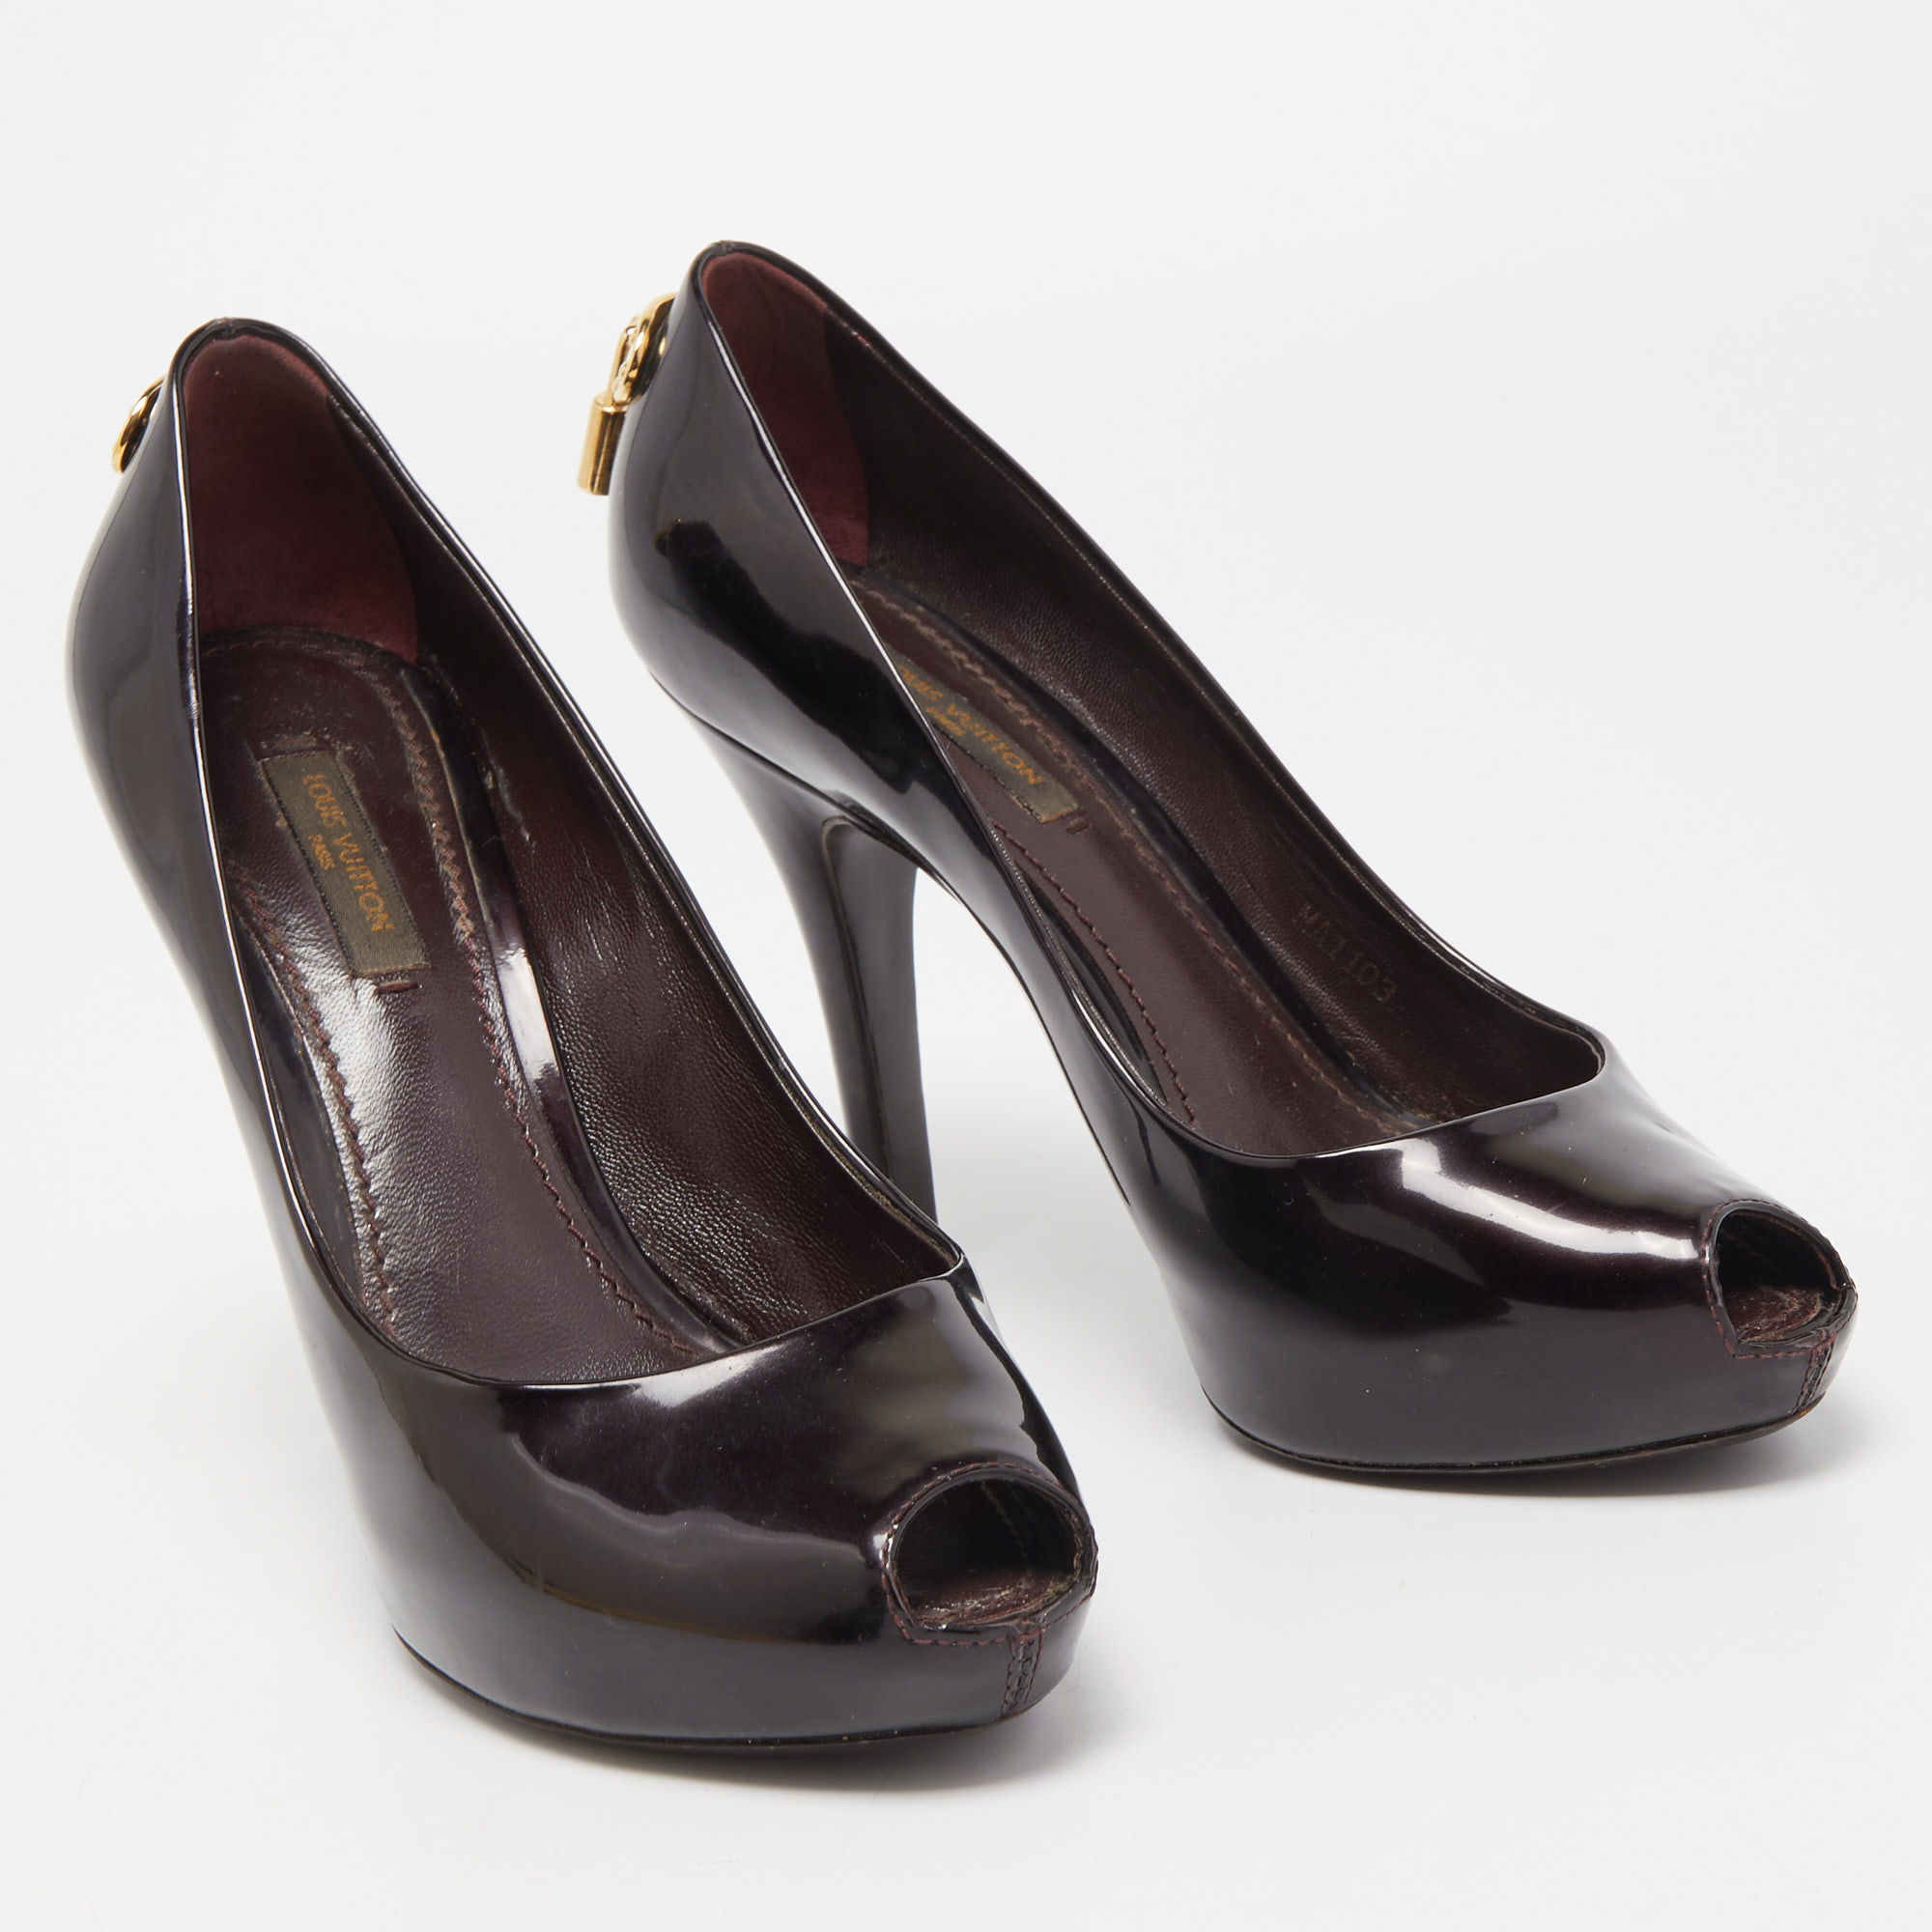 Louis Vuitton Dark Burgundy Patent Leather Oh Really! Pumps Size 36